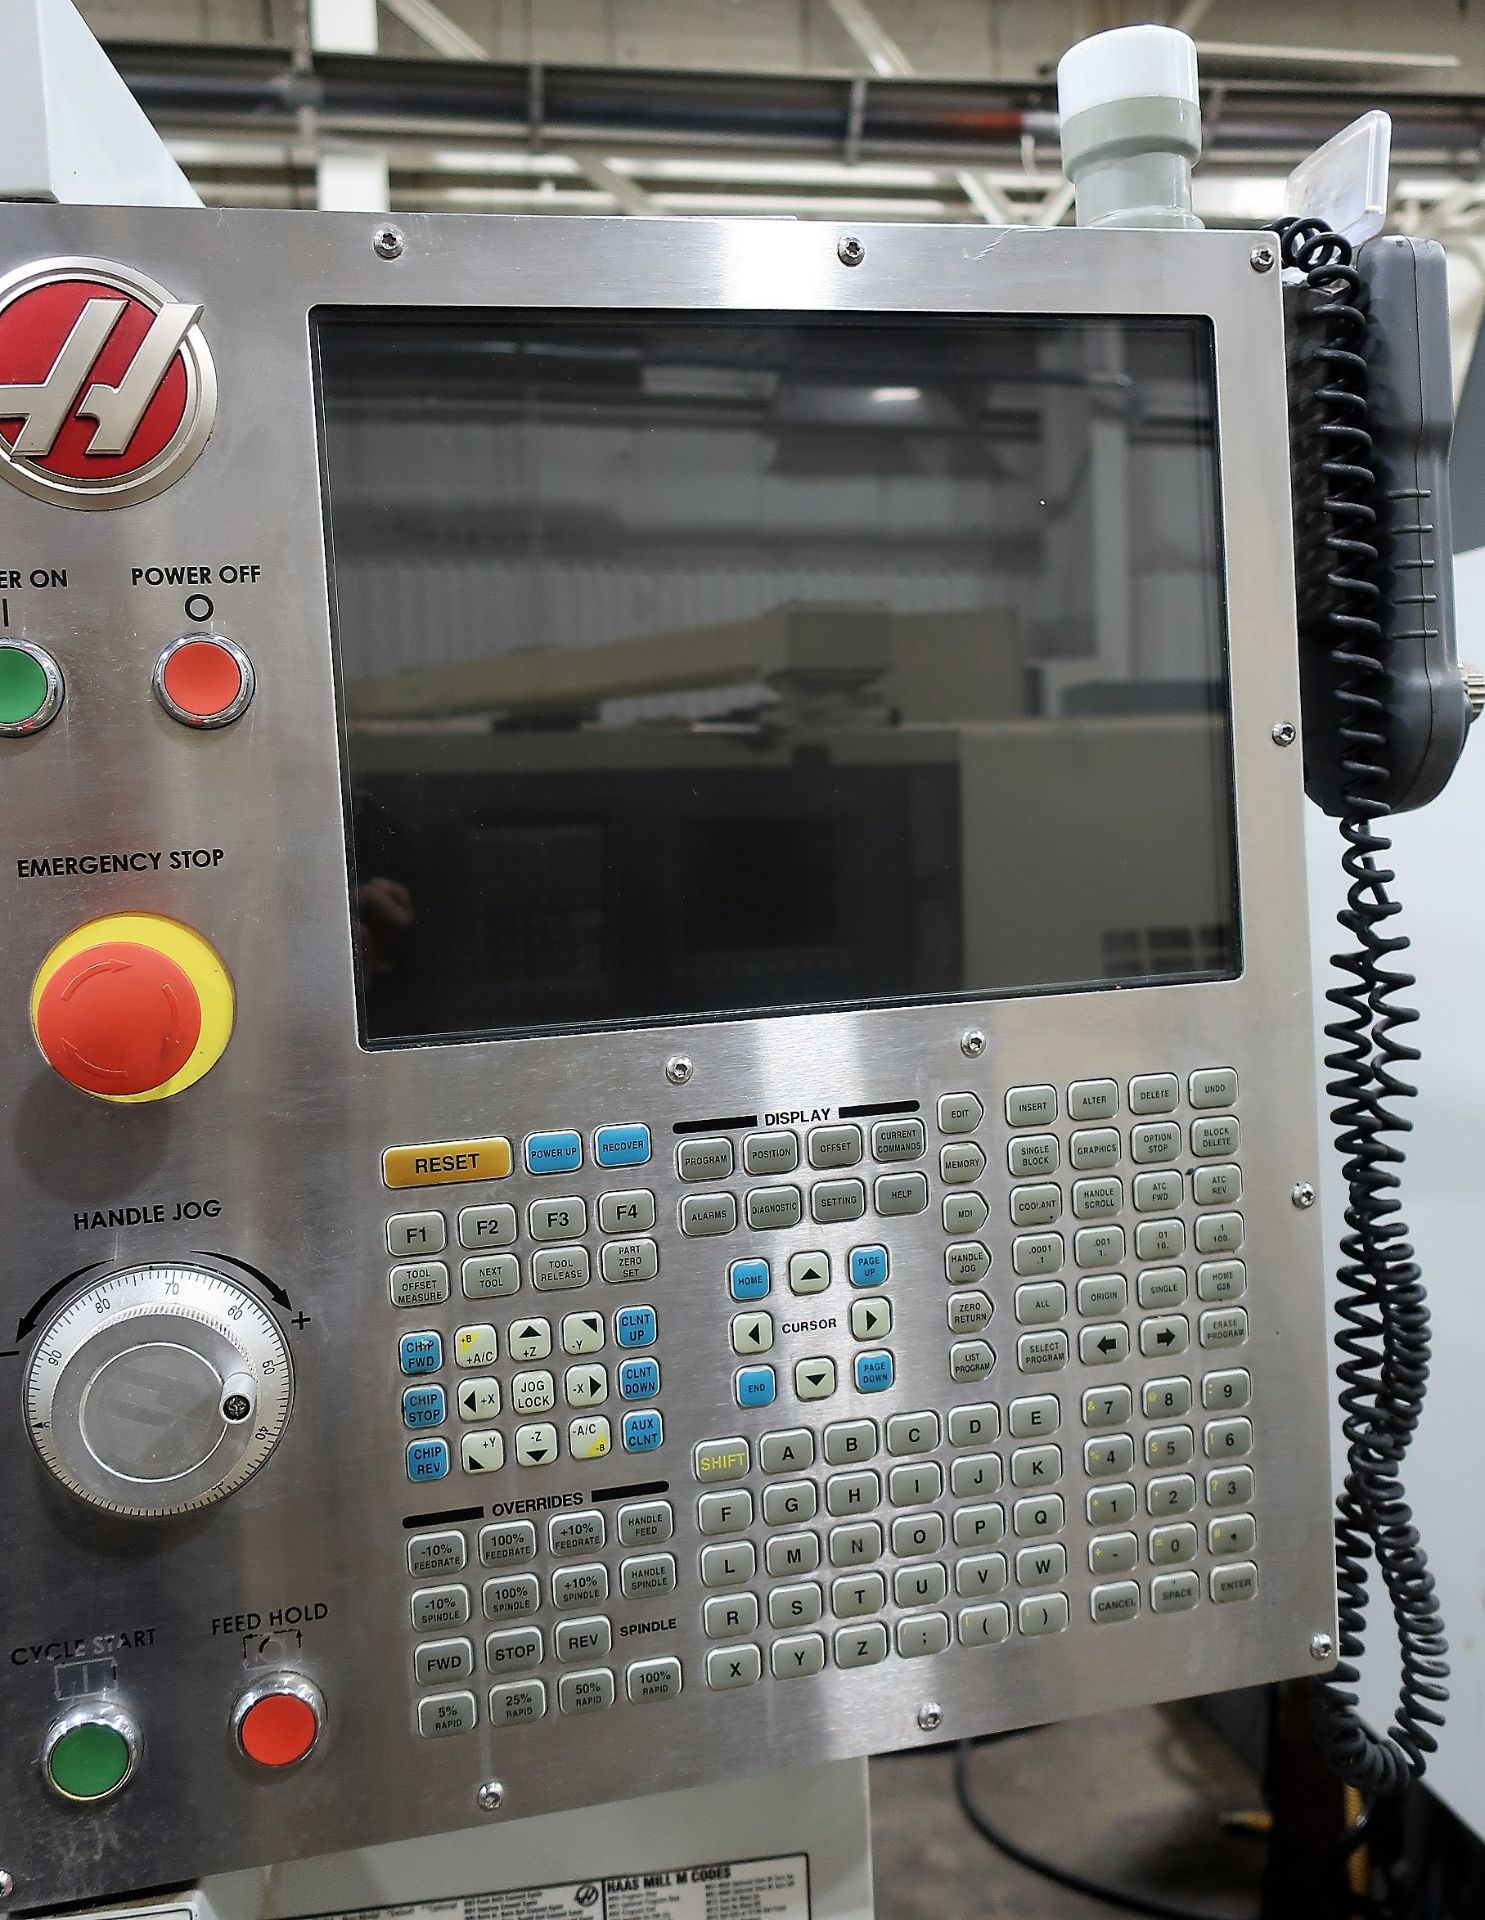 HAAS DT-1 4-AXIS CNC DRILL/TAP VERTICAL MACHINING CENTER, S/N 1131126, NEW 2016 - Image 2 of 10